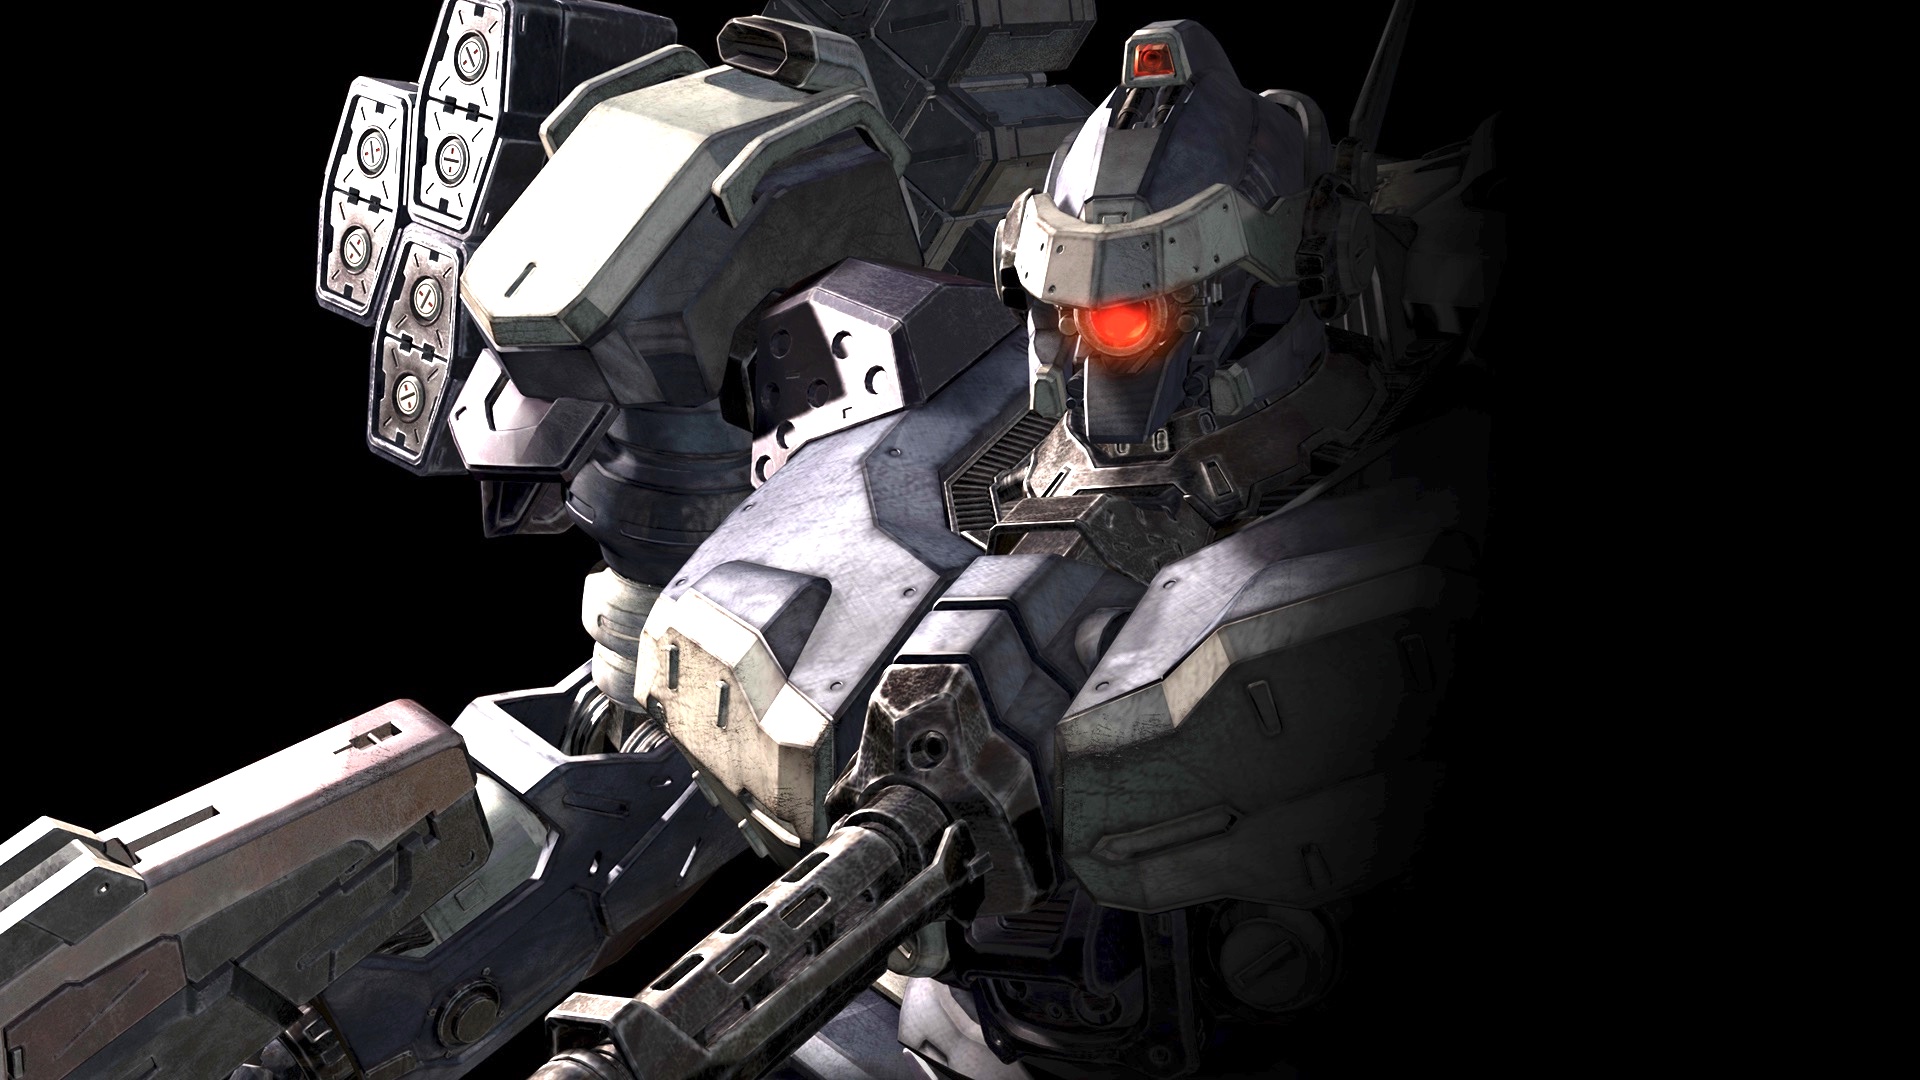 Artwork shows a mech from Armored Core: Verdict Day